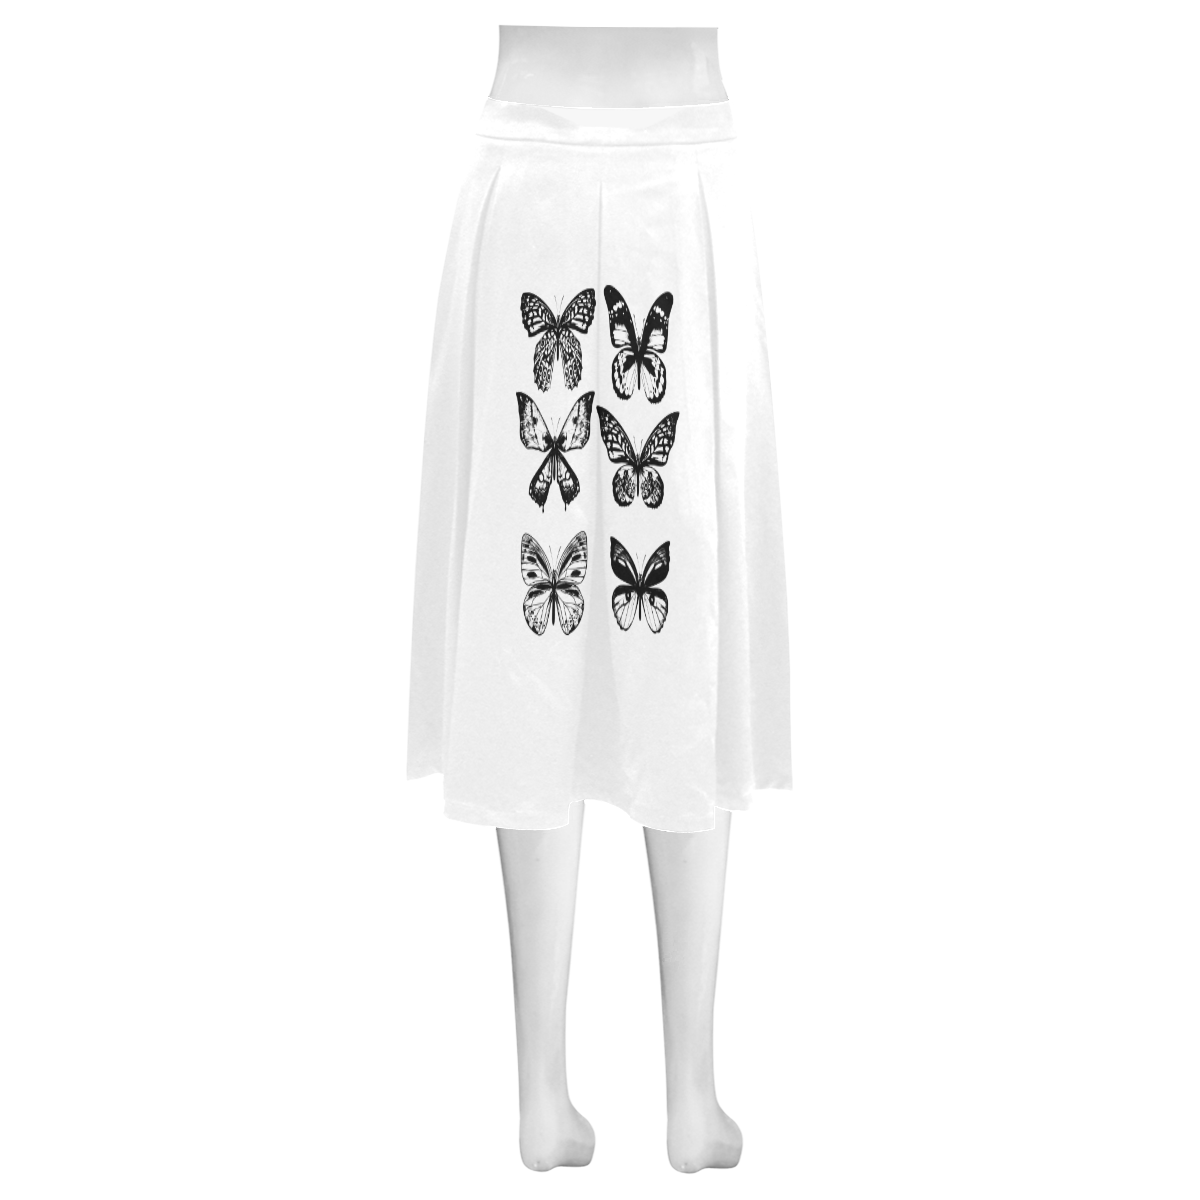 Long Skirts DESIGNERS EDITION : Black and White artistic series with Butterflies. 2016 BLACK WHITE E Mnemosyne Women's Crepe Skirt (Model D16)